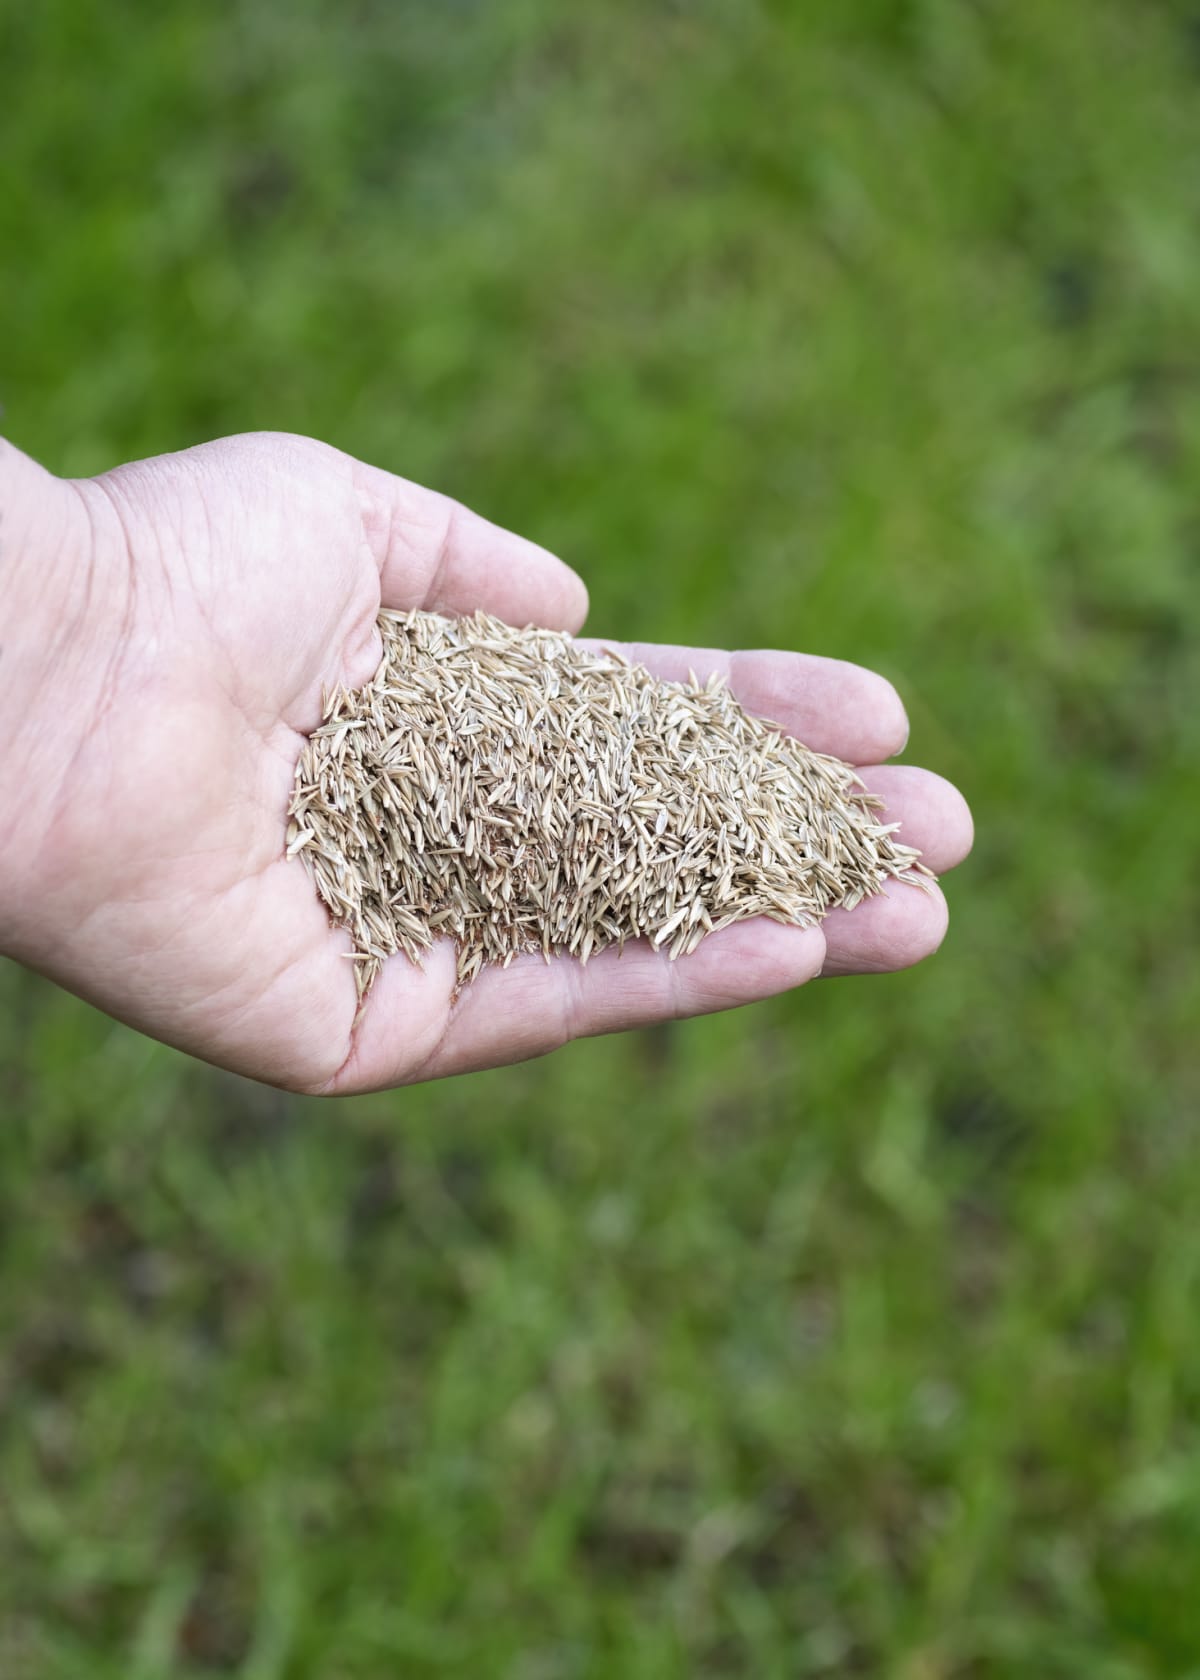 Hand holding grass seed over a patchy lawn.